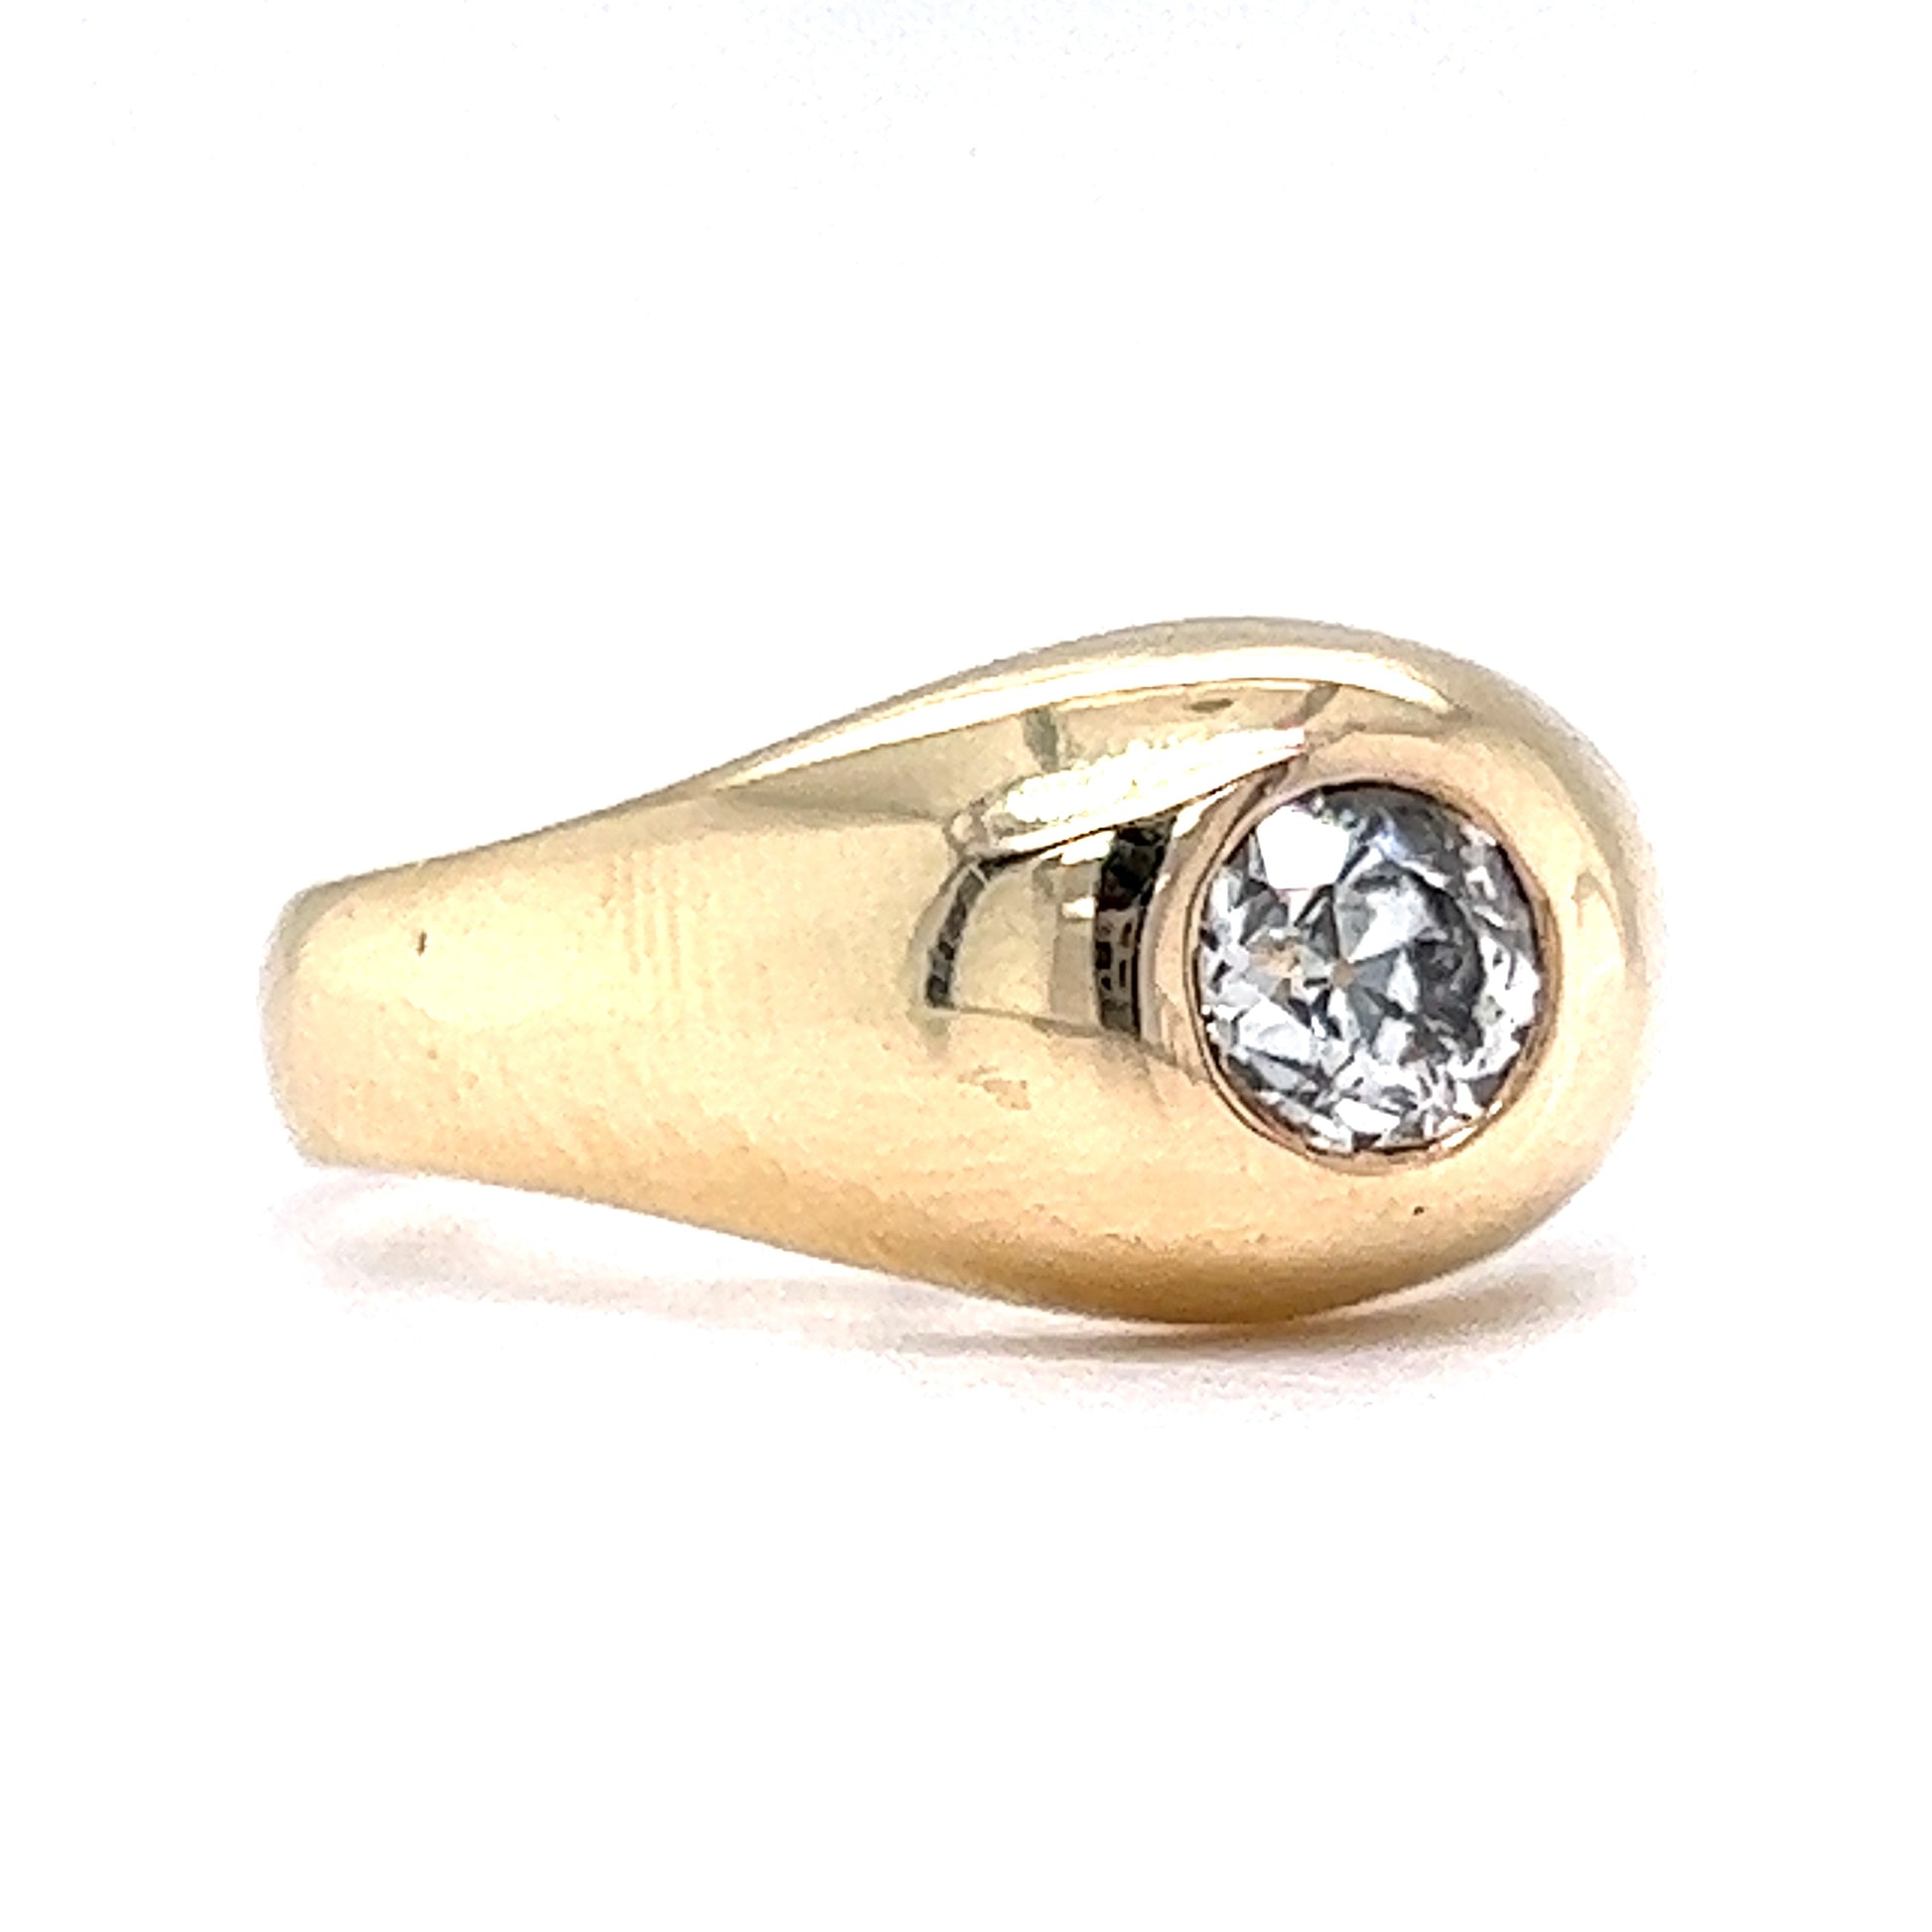 .46 Vintage Old European Diamond Engagement Ring in 14k Yellow GoldComposition: 14 Karat Yellow Gold Ring Size: 6.25 Total Diamond Weight: .46ct Total Gram Weight: 5.1 g Inscription: 14k
      